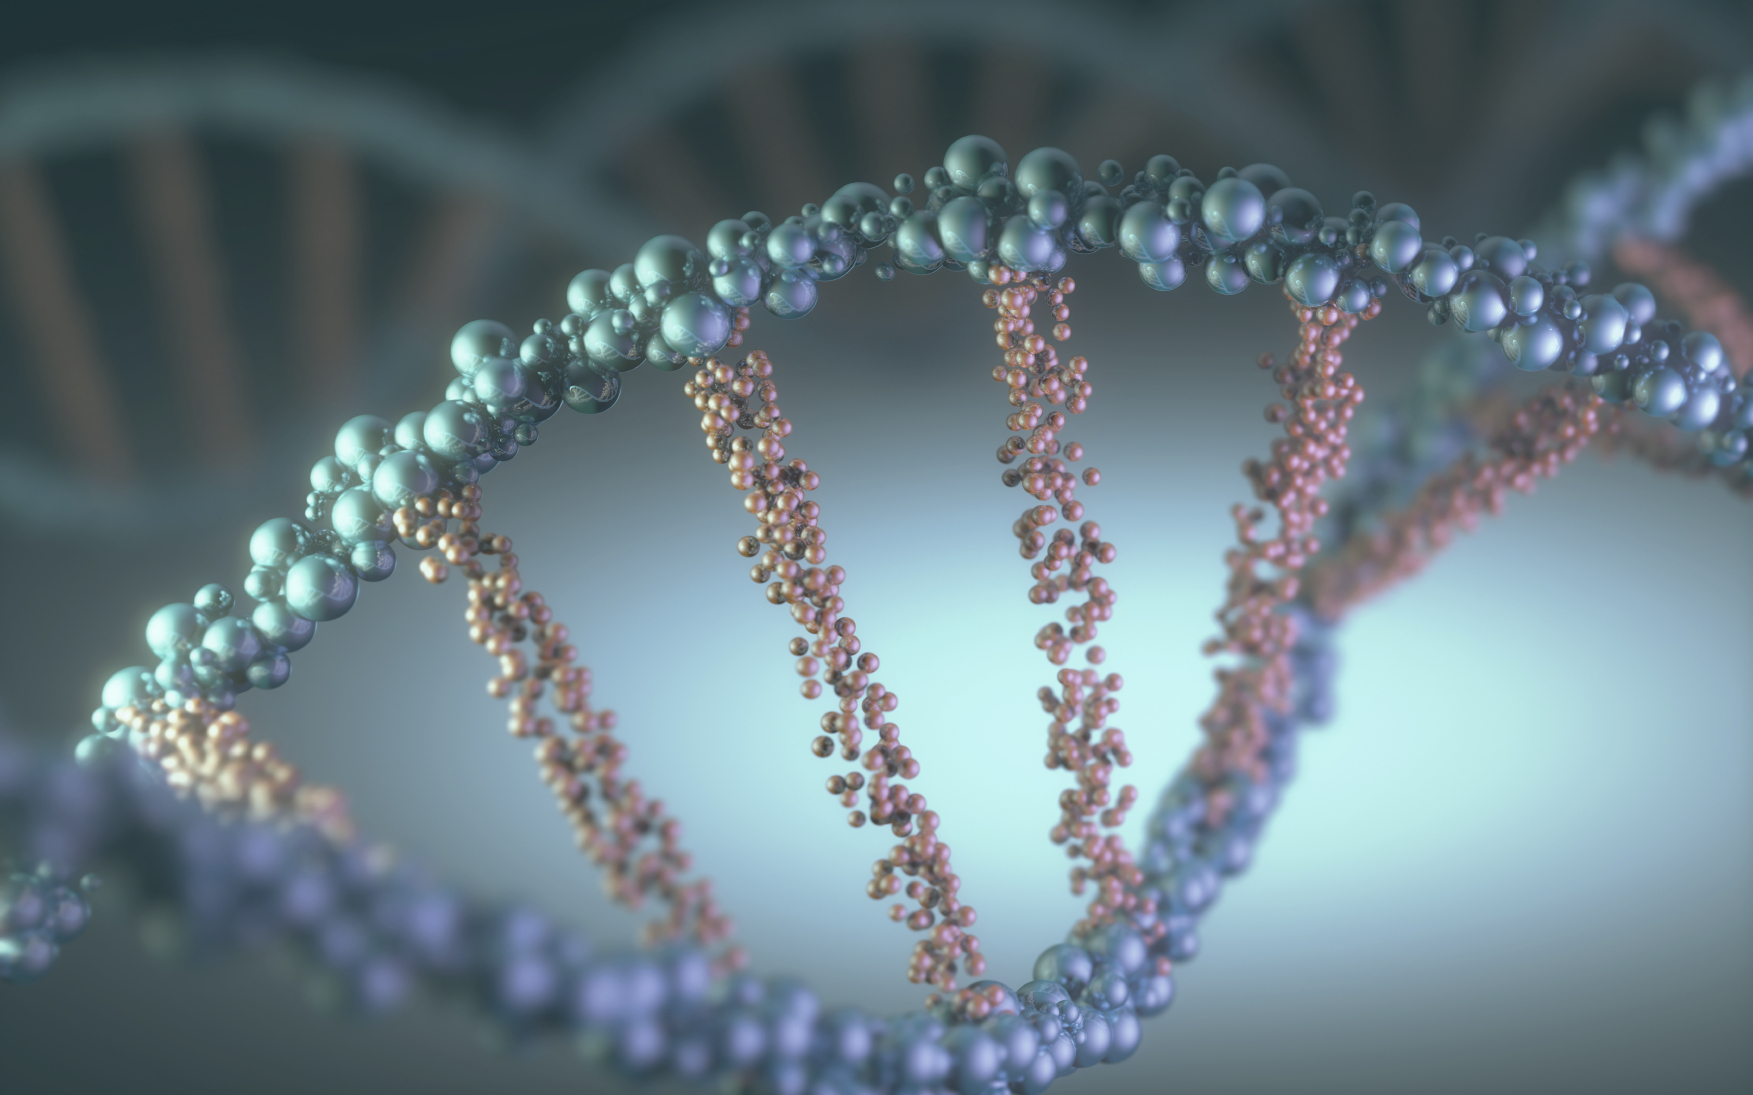 DNA helix in a futuristic concept of the evolution of science and medicine.